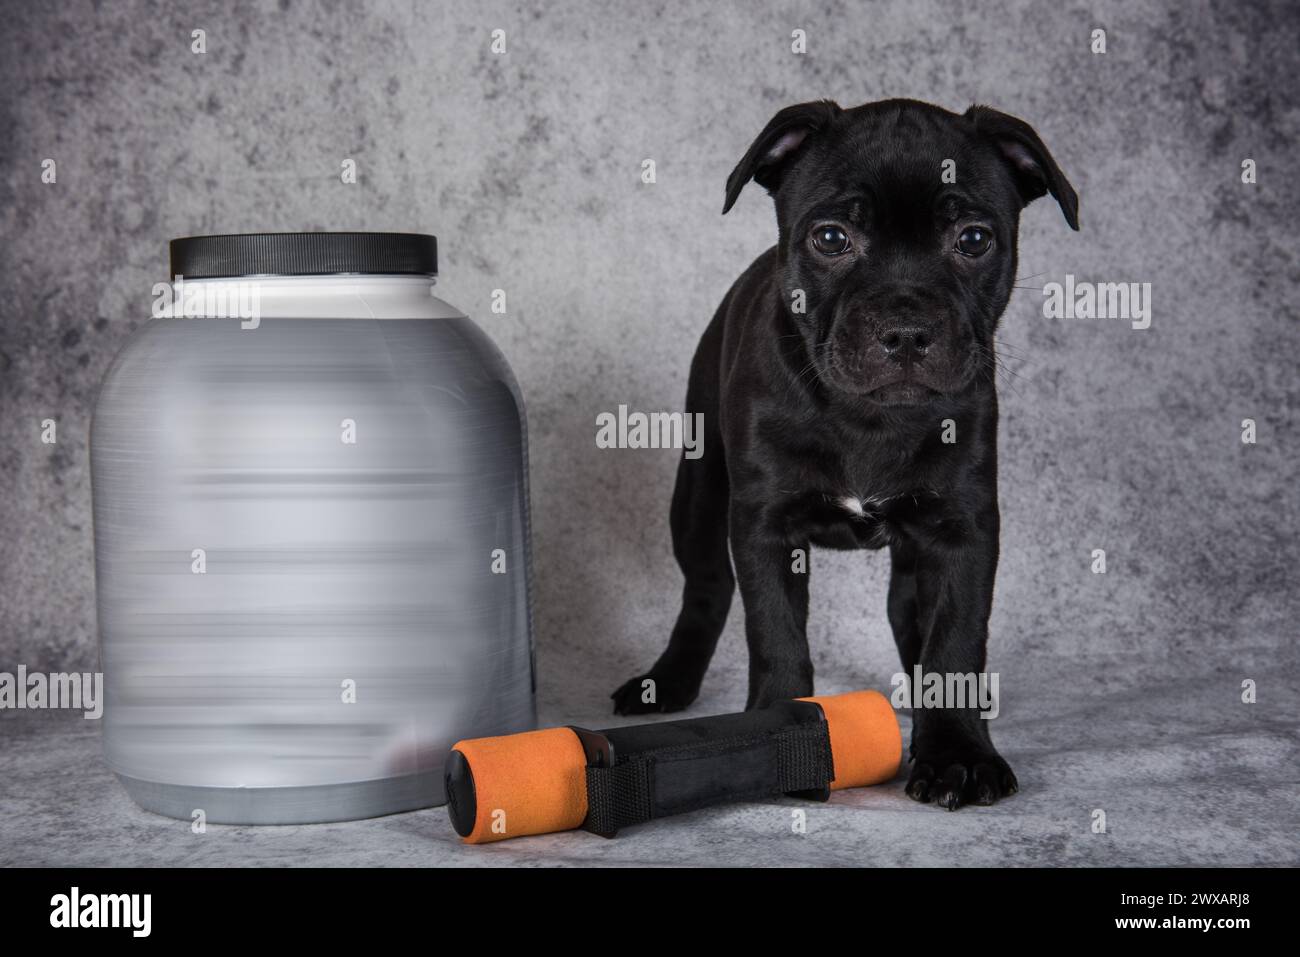 Black American Staffordshire Bull Terrier dog puppy with dumbbells for sports and a jar of vitamins. Stock Photo